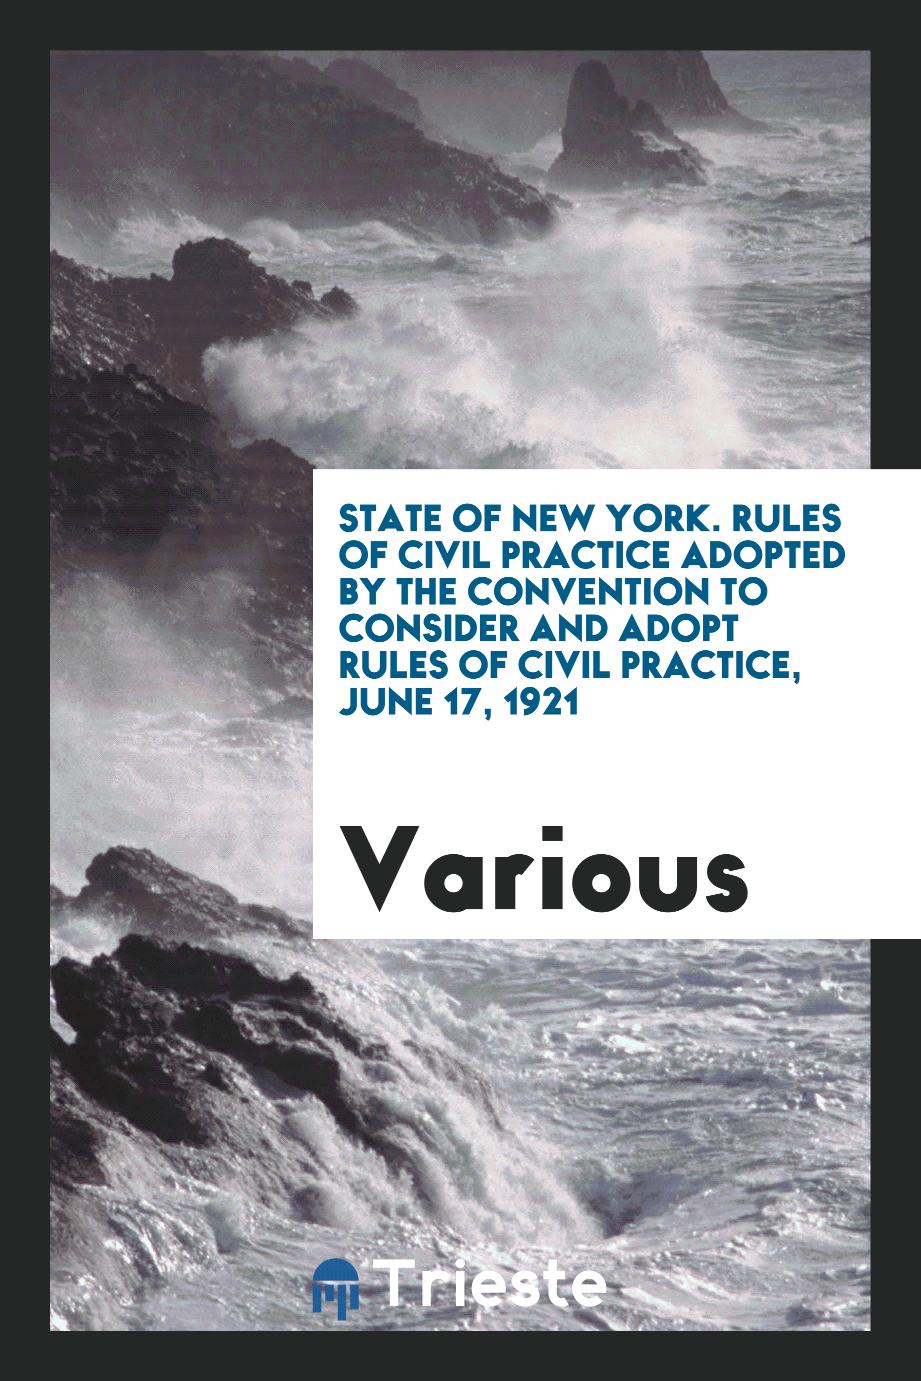 State of New York. Rules of Civil Practice Adopted by the Convention to Consider and Adopt Rules of Civil Practice, June 17, 1921